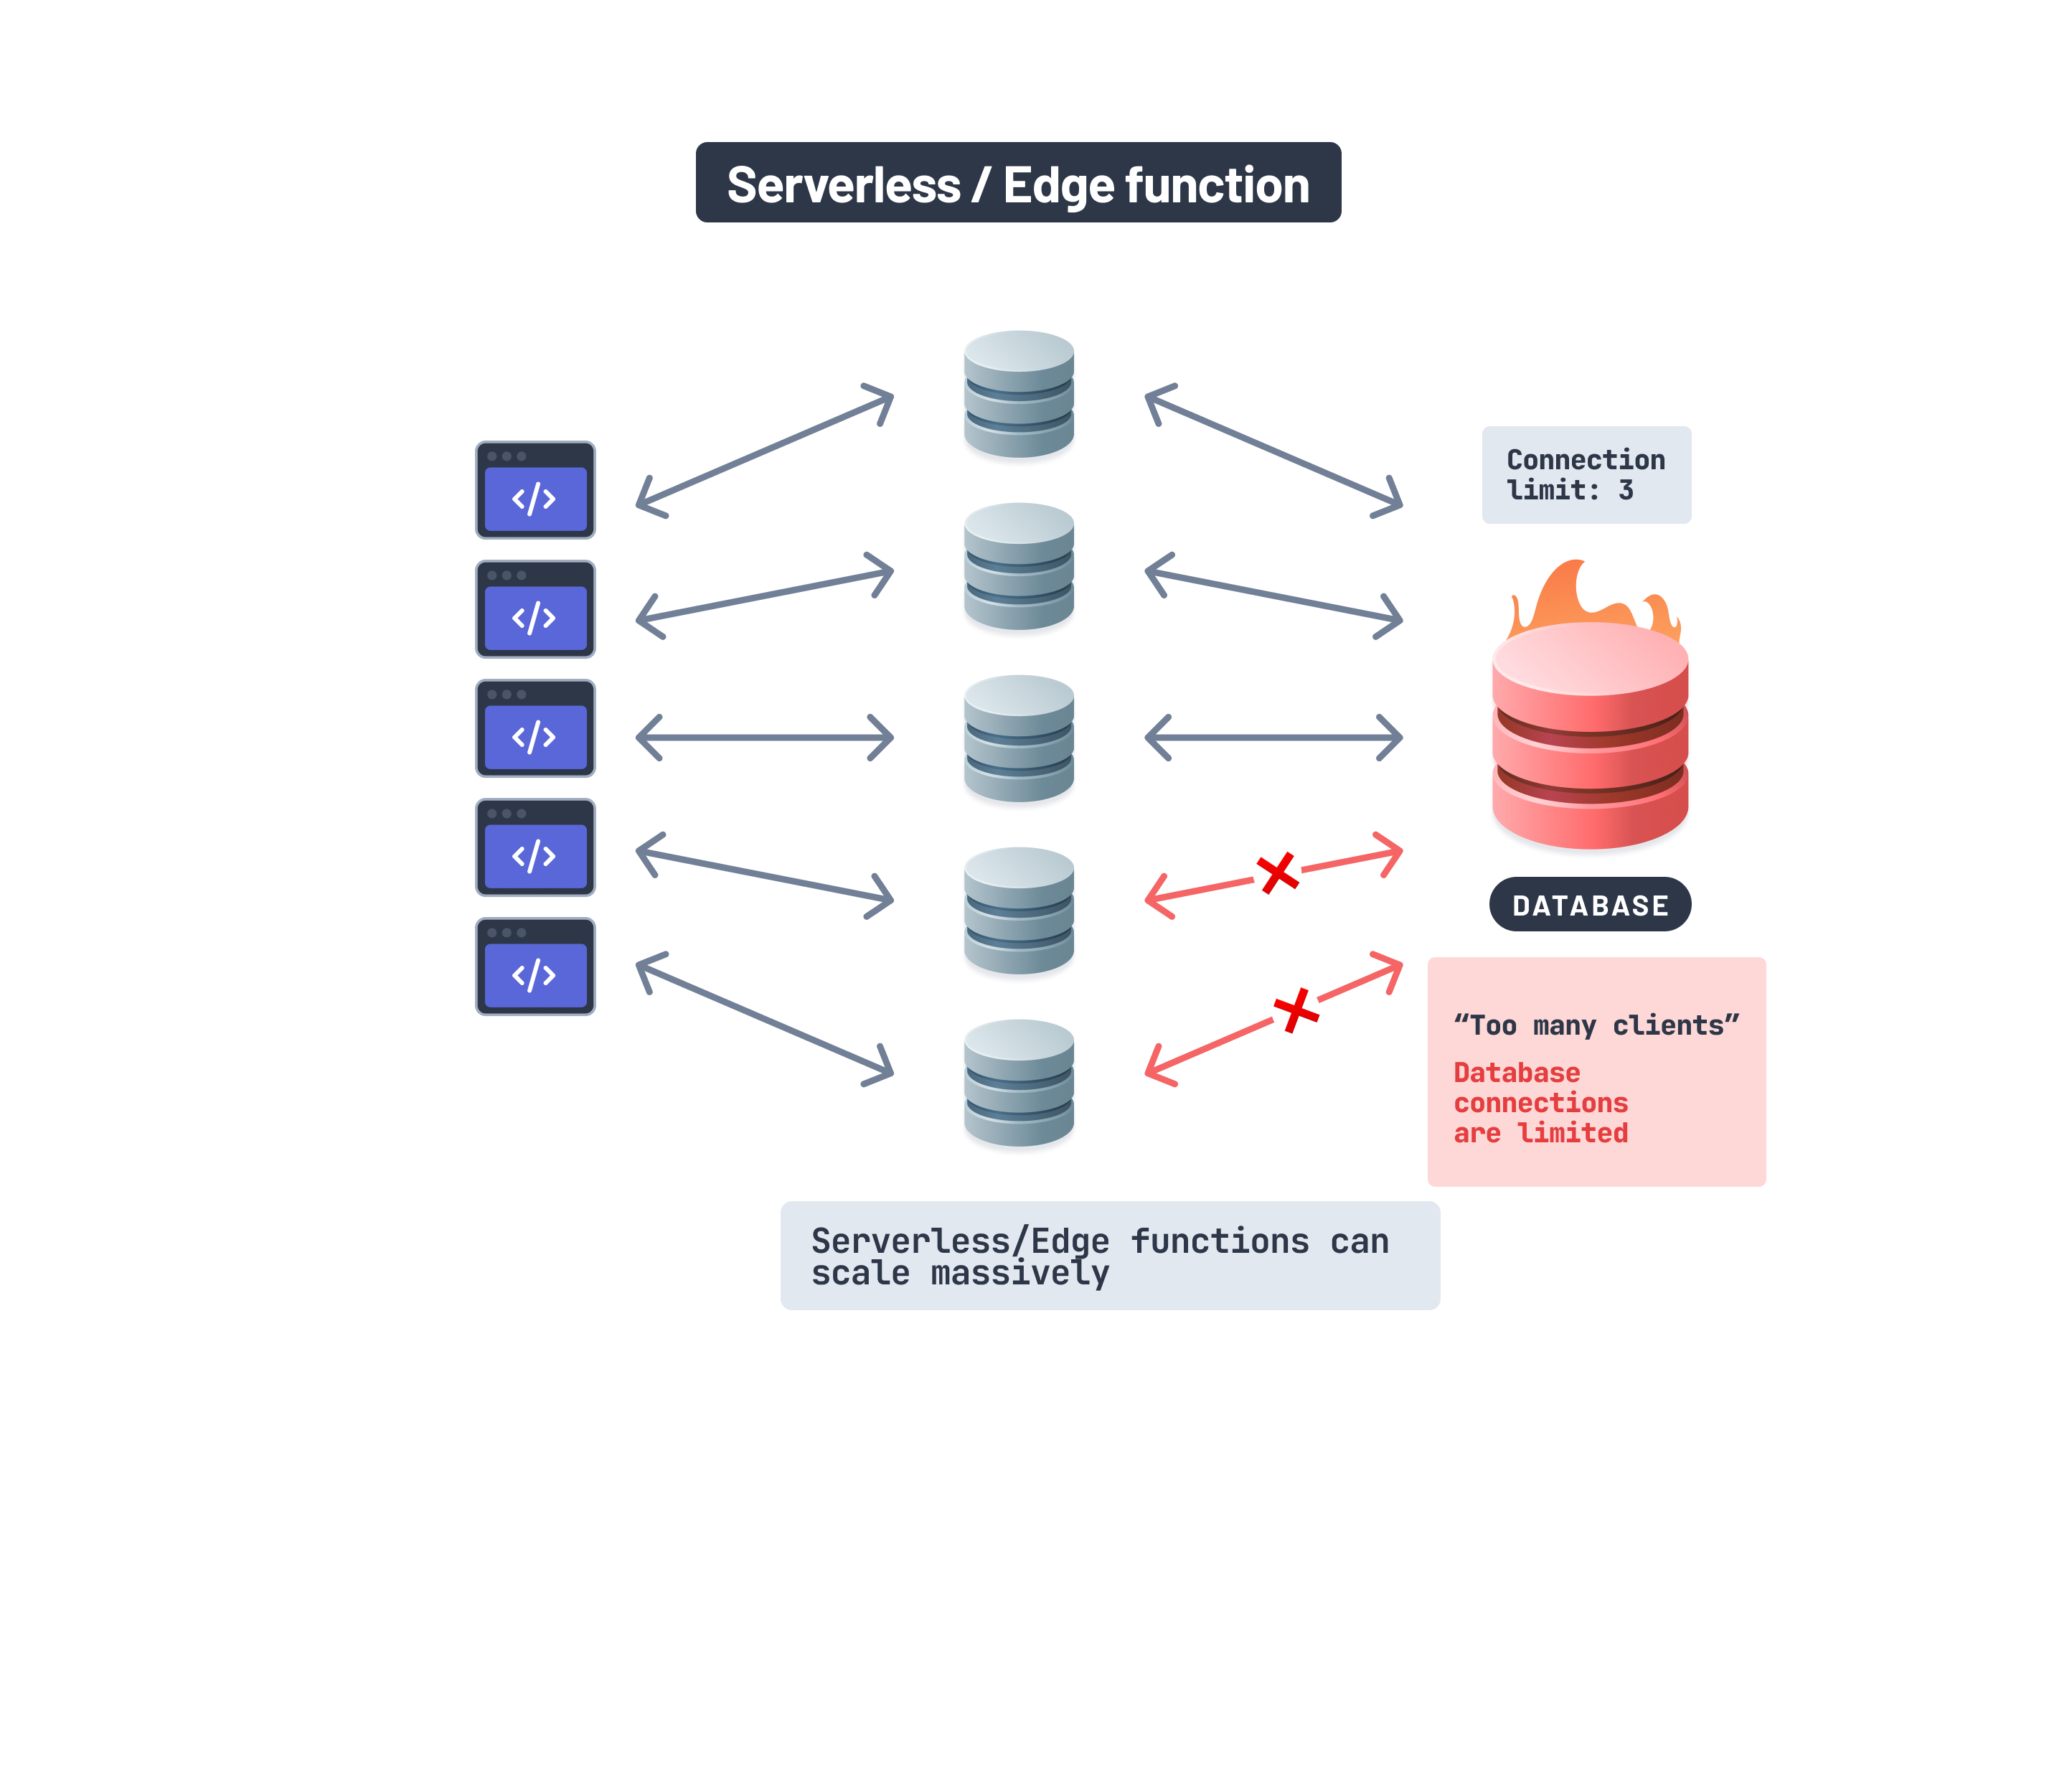 Serverless/Edge functions can scale massively but database connections can't scale massively